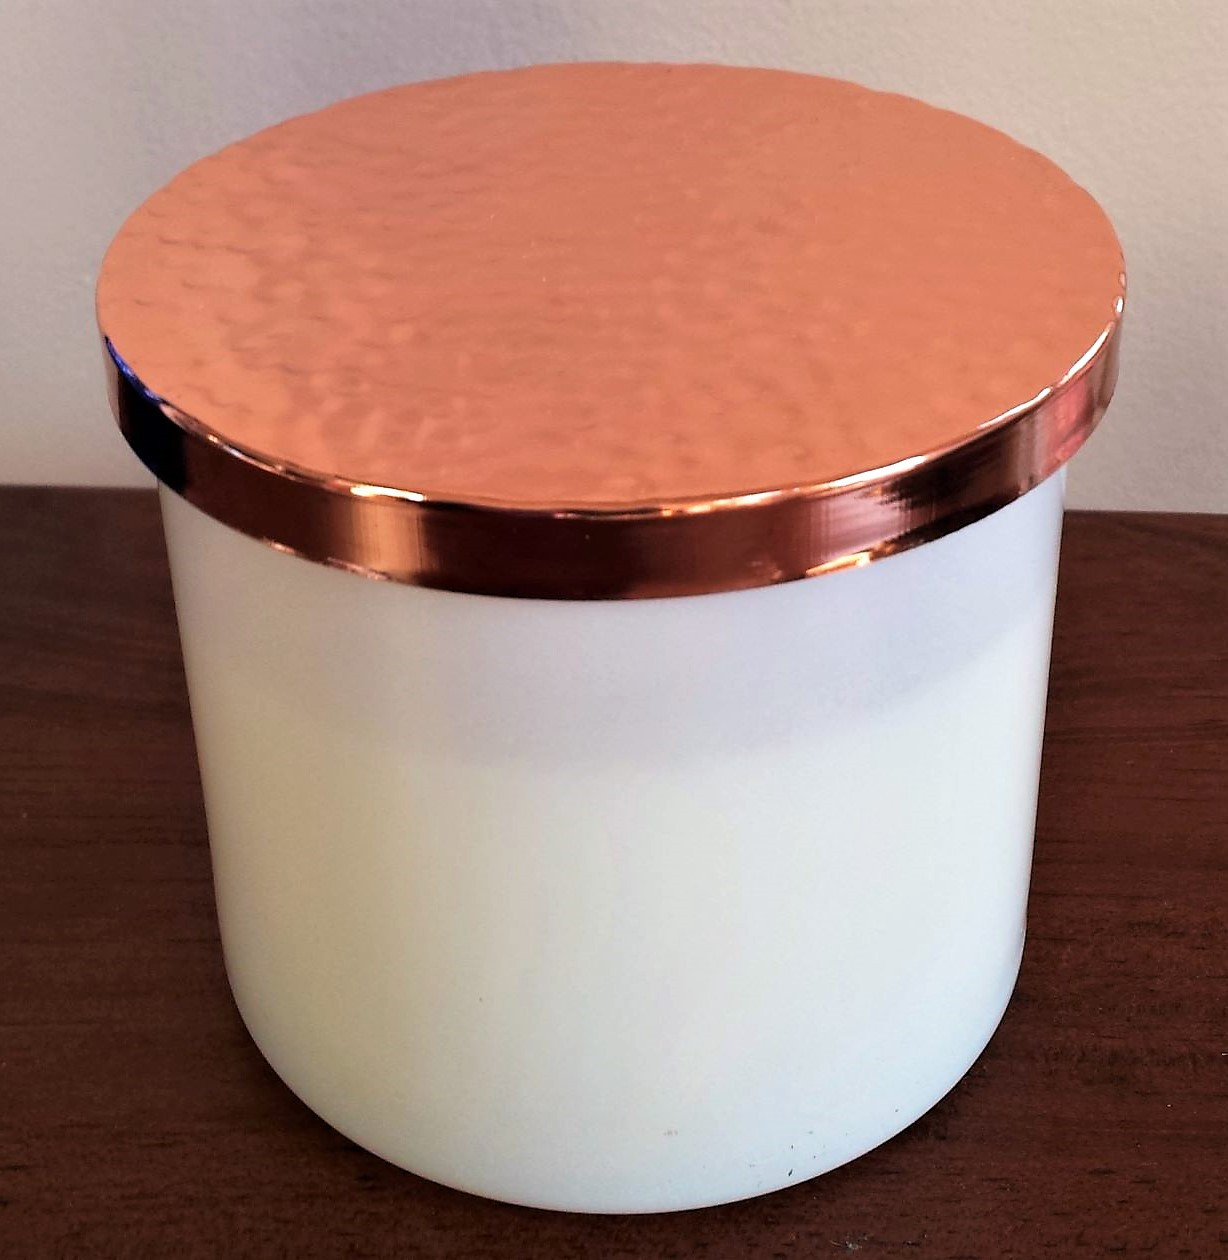 Glass-Mini Jar *No Lid*. 1803 Candles - Best Scented Soy Candles!